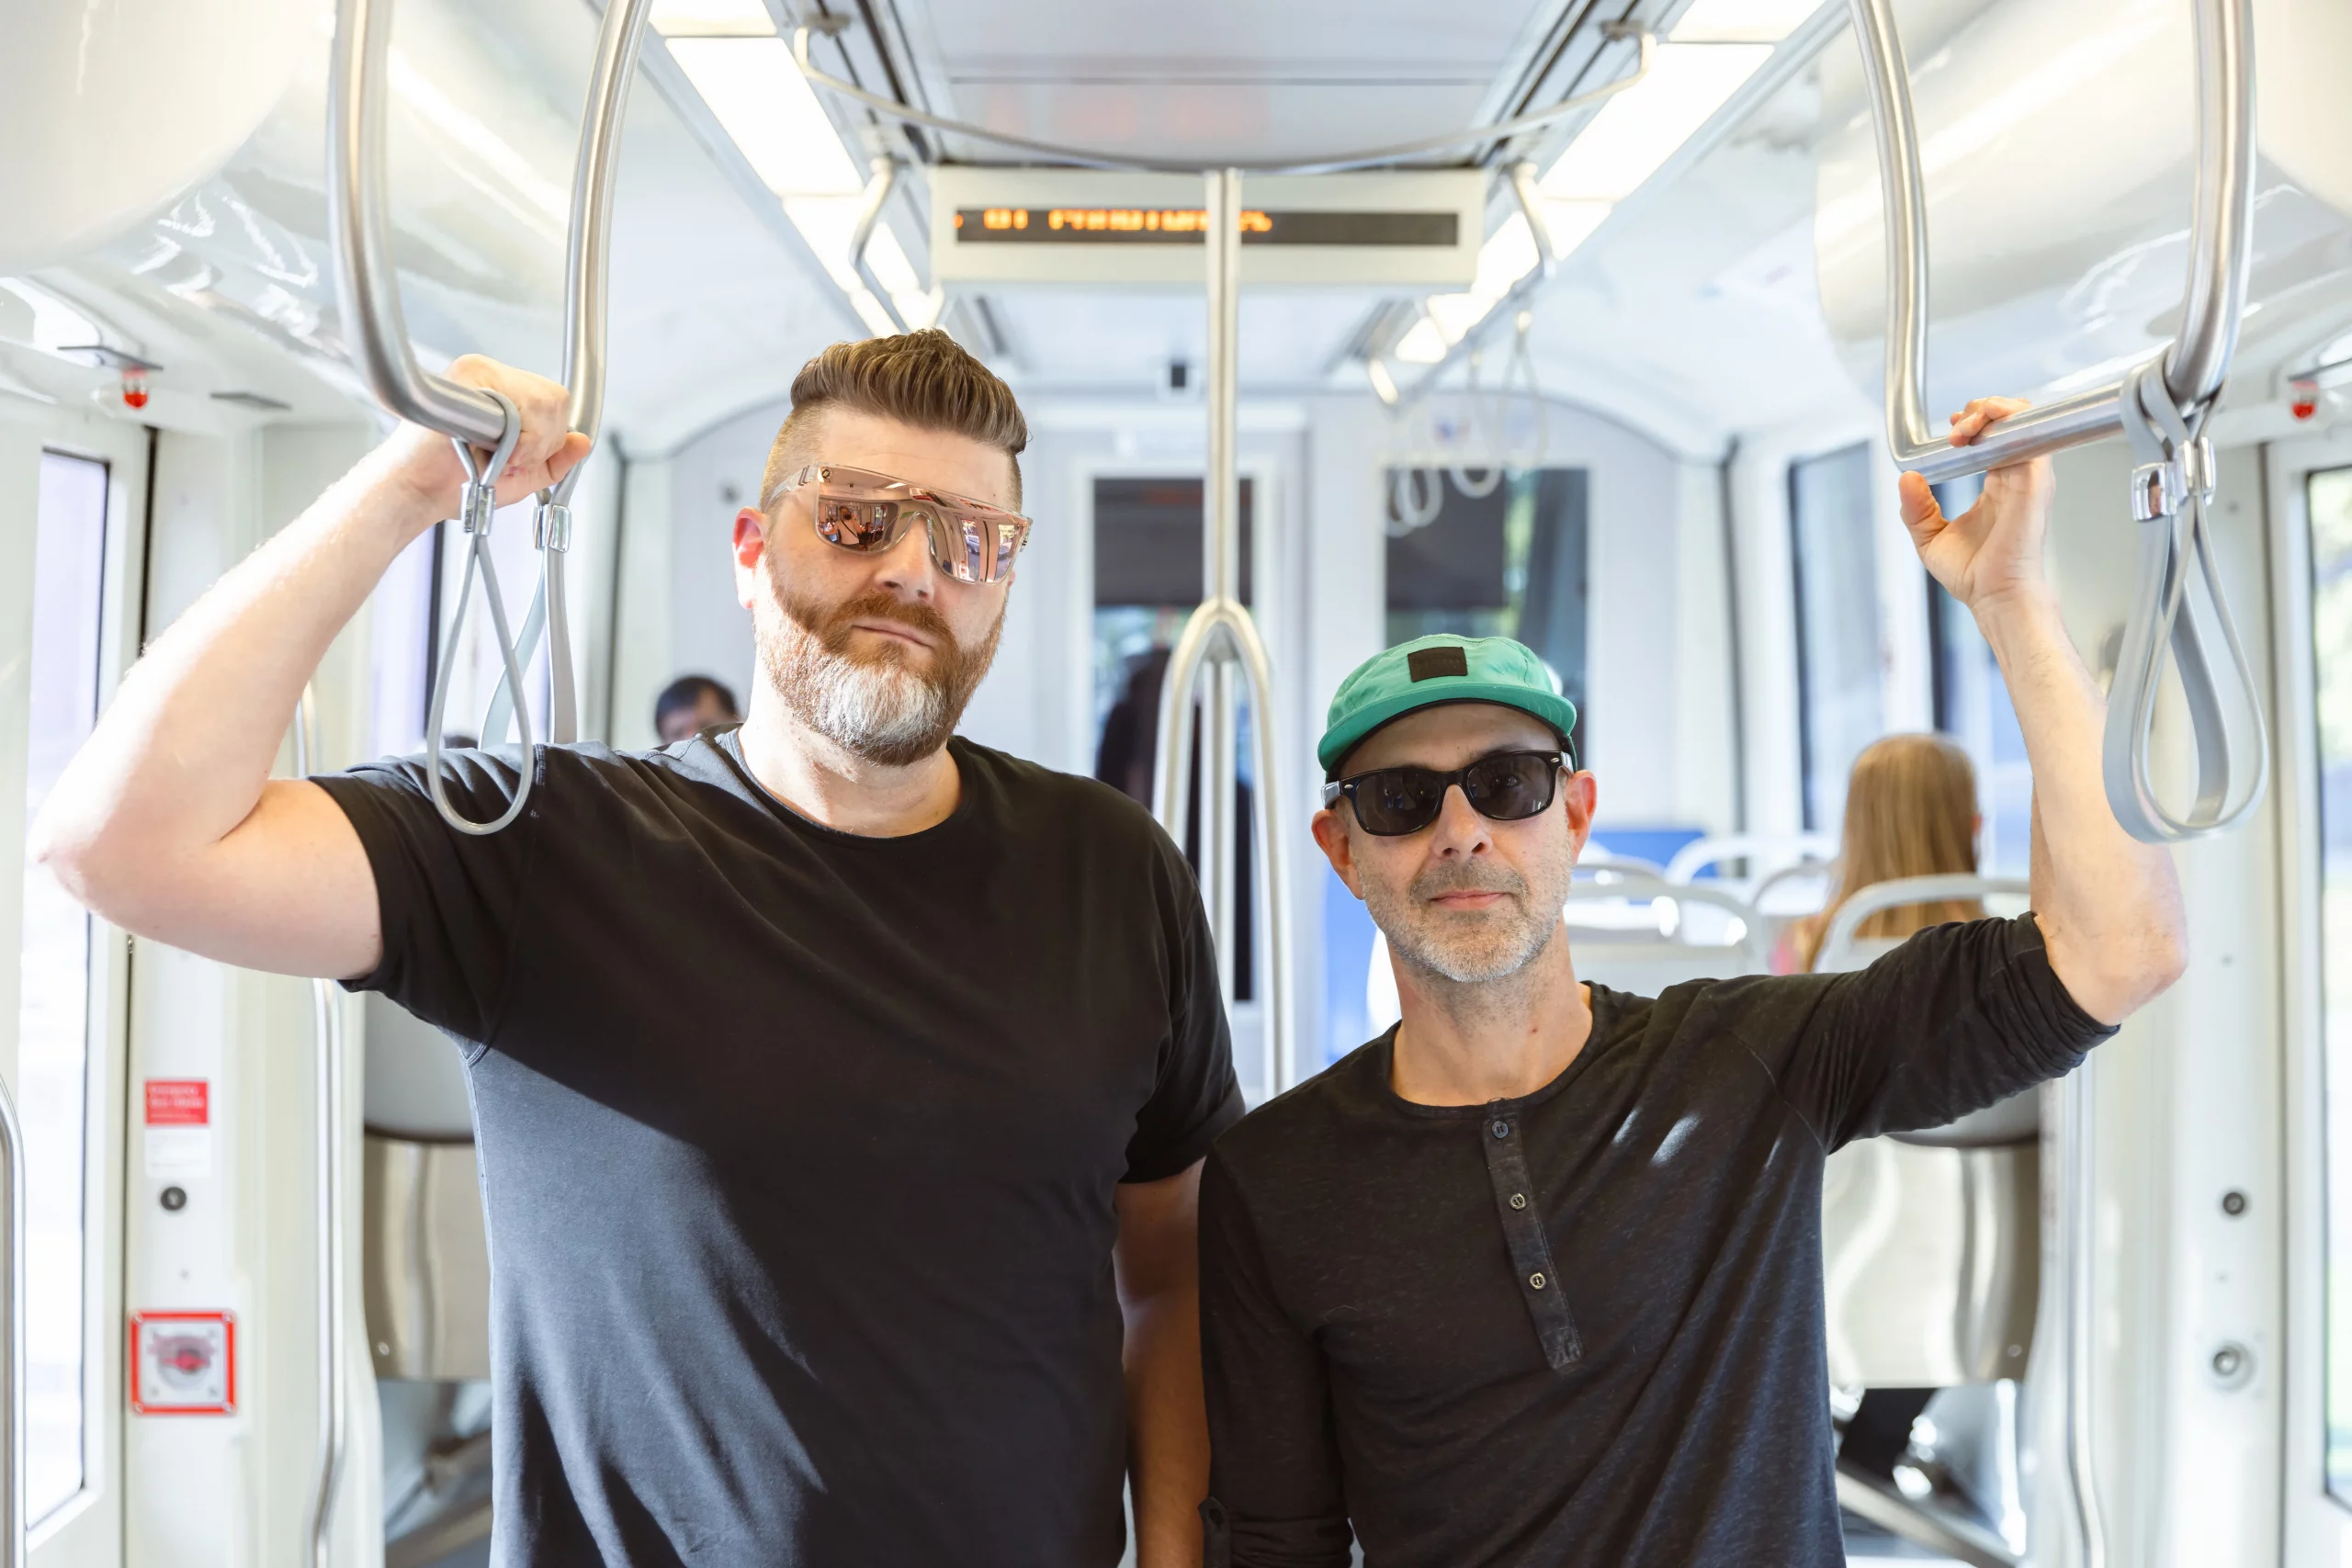 (L–R) Aaron Valentine and Mike Smith of local band Cassette Drift stand side-by-side as they ride the UTA Trax.